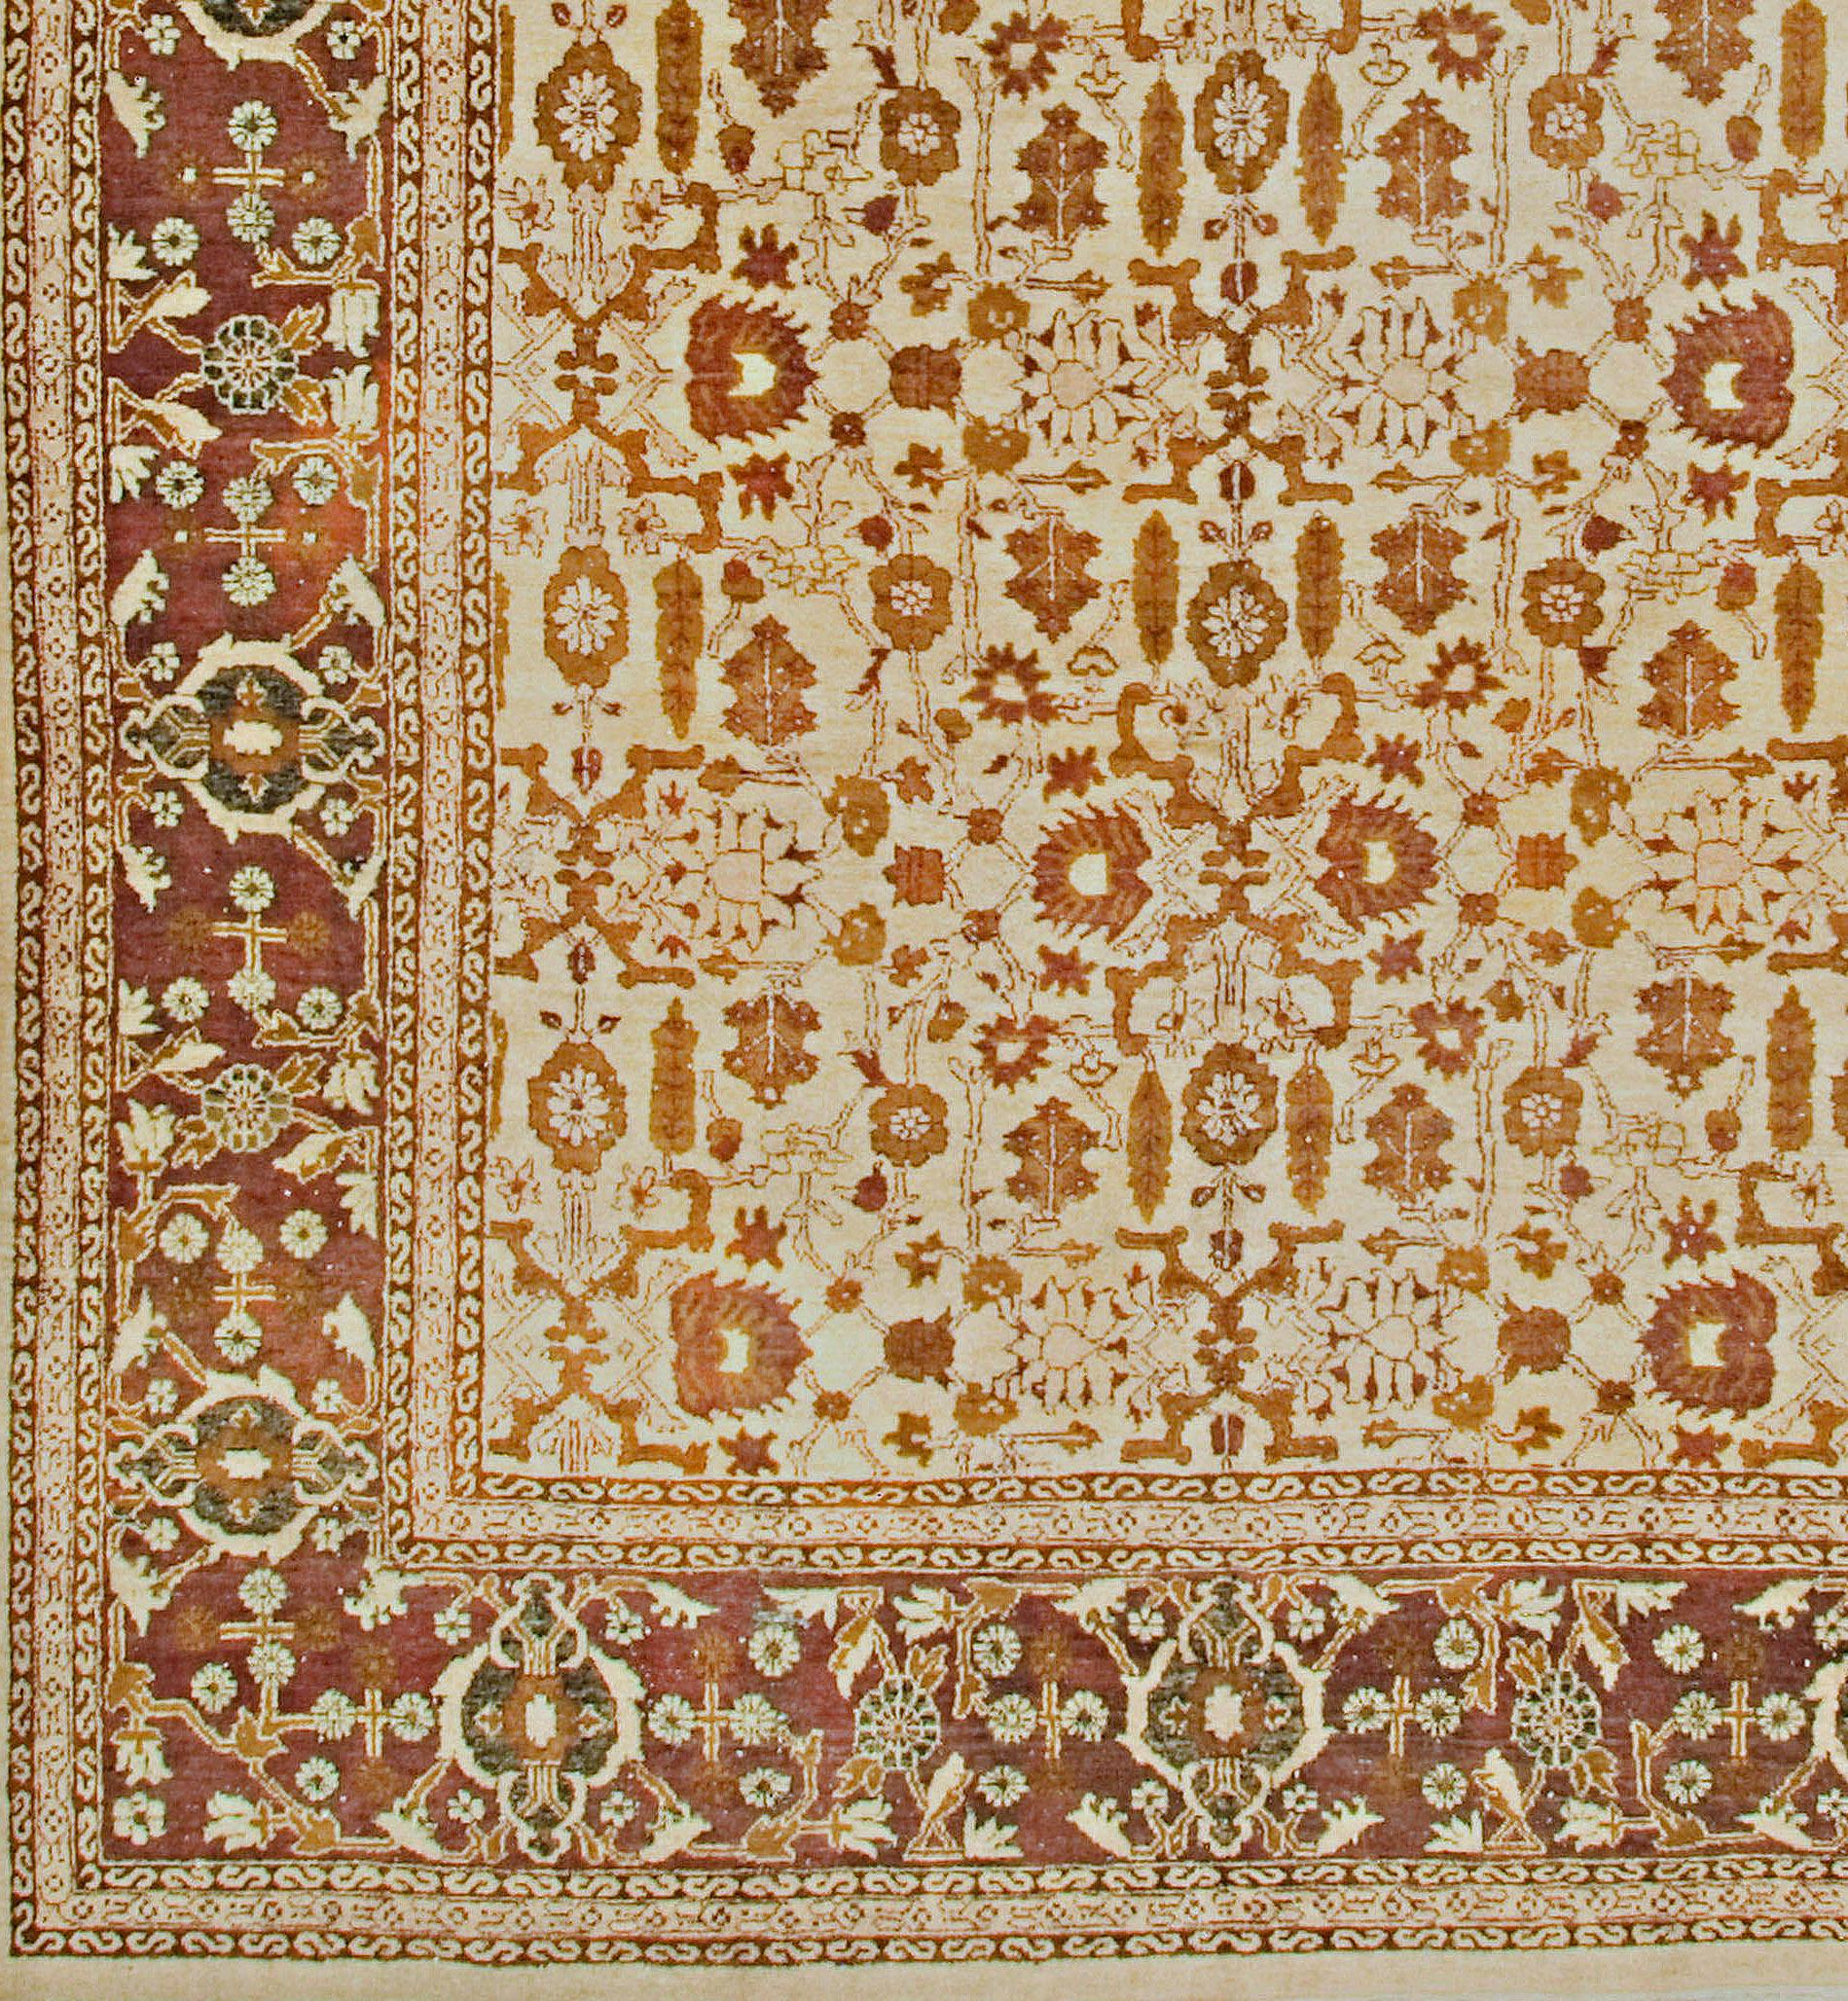 Antique Indian Agra rug, circa 1900. The pattern is endless in this decorative antique Agra carpet. Appearing to pass beneath the border the array of angular vine segments sectional palmettes stylized cypress trees and various natural elements